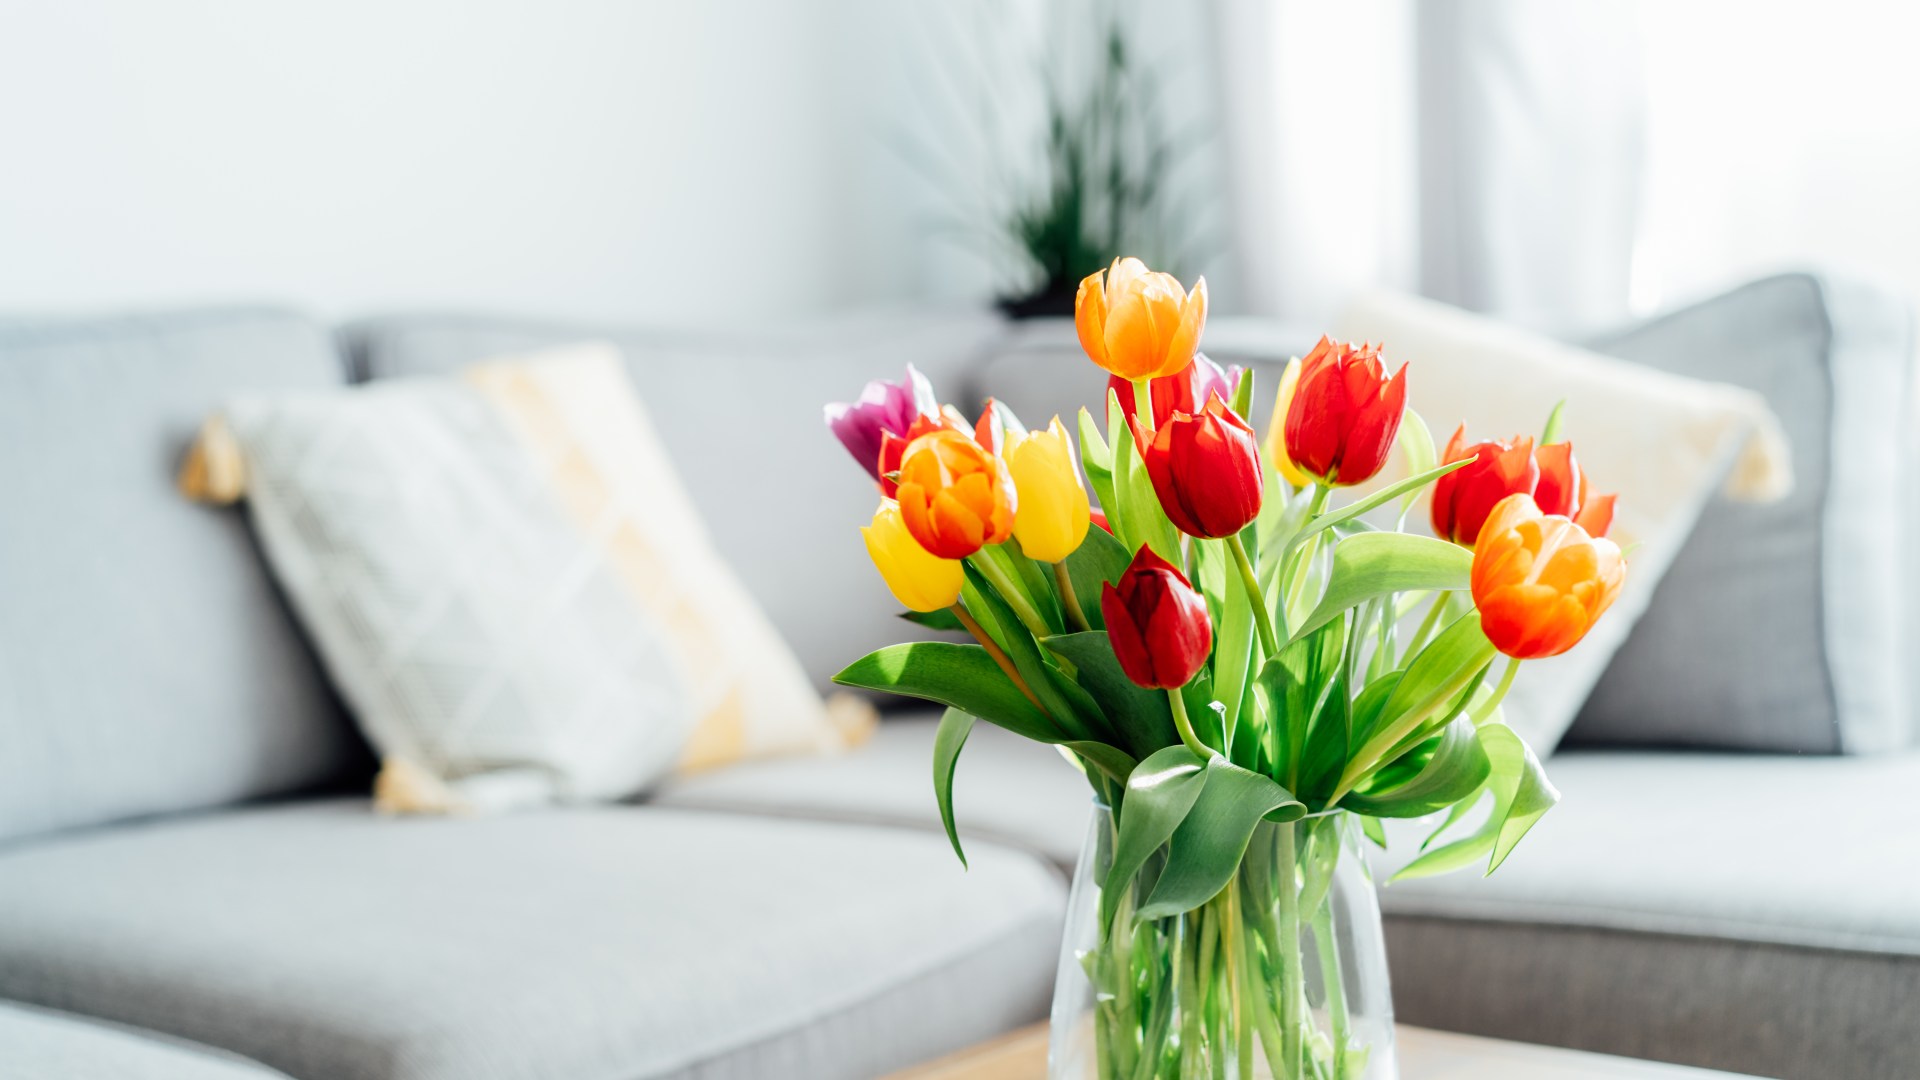 I’m an interiors expert – here’s the 8 essential spring updates you should make right now to refresh your home [Video]